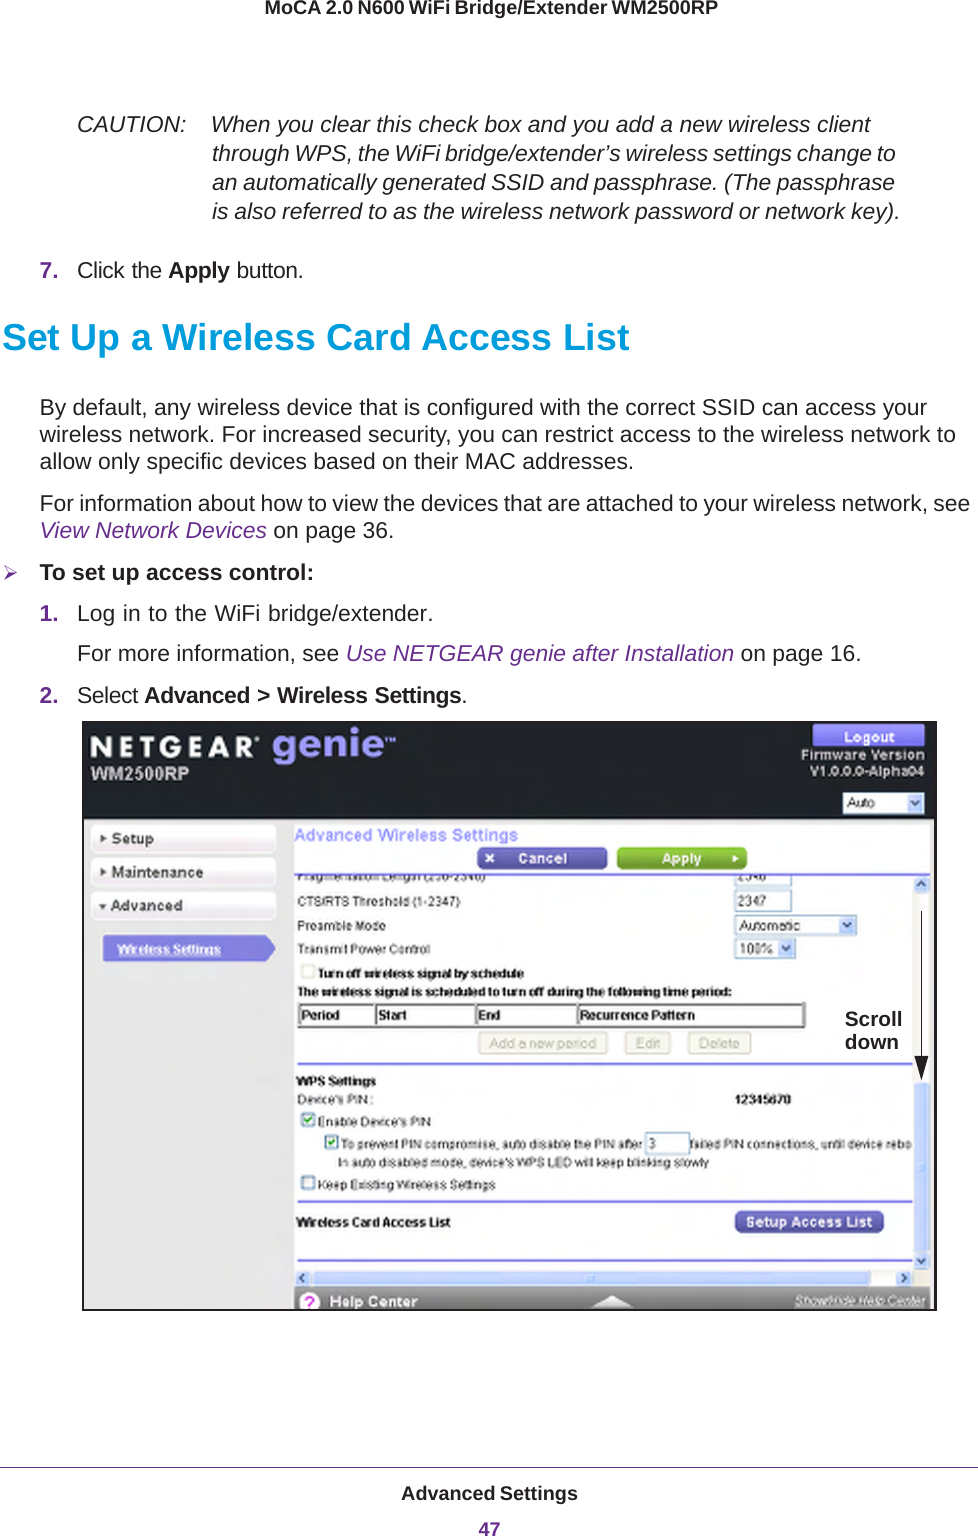 Advanced Settings47 MoCA 2.0 N600 WiFi Bridge/Extender WM2500RPCAUTION:    When you clear this check box and you add a new wireless client through WPS, the WiFi bridge/extender’s wireless settings change to an automatically generated SSID and passphrase. (The passphrase is also referred to as the wireless network password or network key).7. Click the Apply button.Set Up a Wireless Card Access ListBy default, any wireless device that is configured with the correct SSID can access your wireless network. For increased security, you can restrict access to the wireless network to allow only specific devices based on their MAC addresses. For information about how to view the devices that are attached to your wireless network, see View Network Devices on page  36.To set up access control:1. Log in to the WiFi bridge/extender.For more information, see Use NETGEAR genie after Installation on page  16.2. Select Advanced &gt; Wireless Settings.Scrolldown